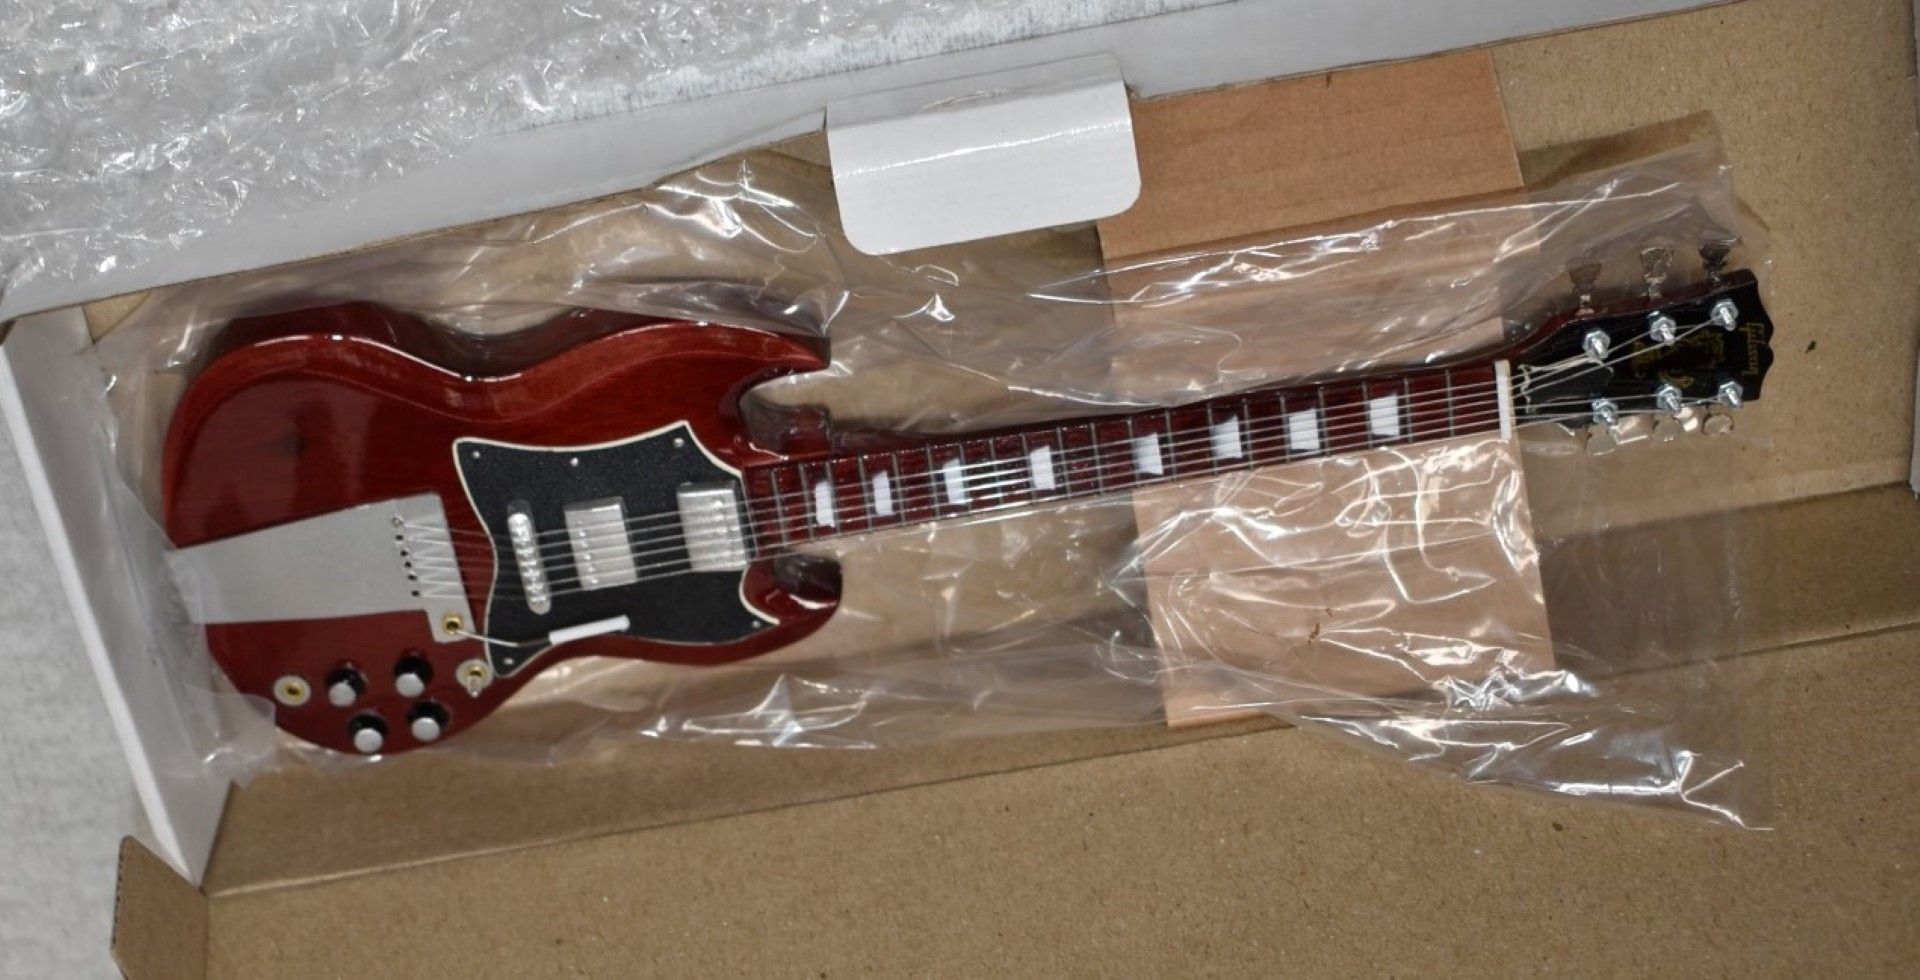 1 x Miniature Hand Made Guitar - ACDC Angus Young Gibson SG - New & Unused - RRP £35 - Boxed With - Image 2 of 7